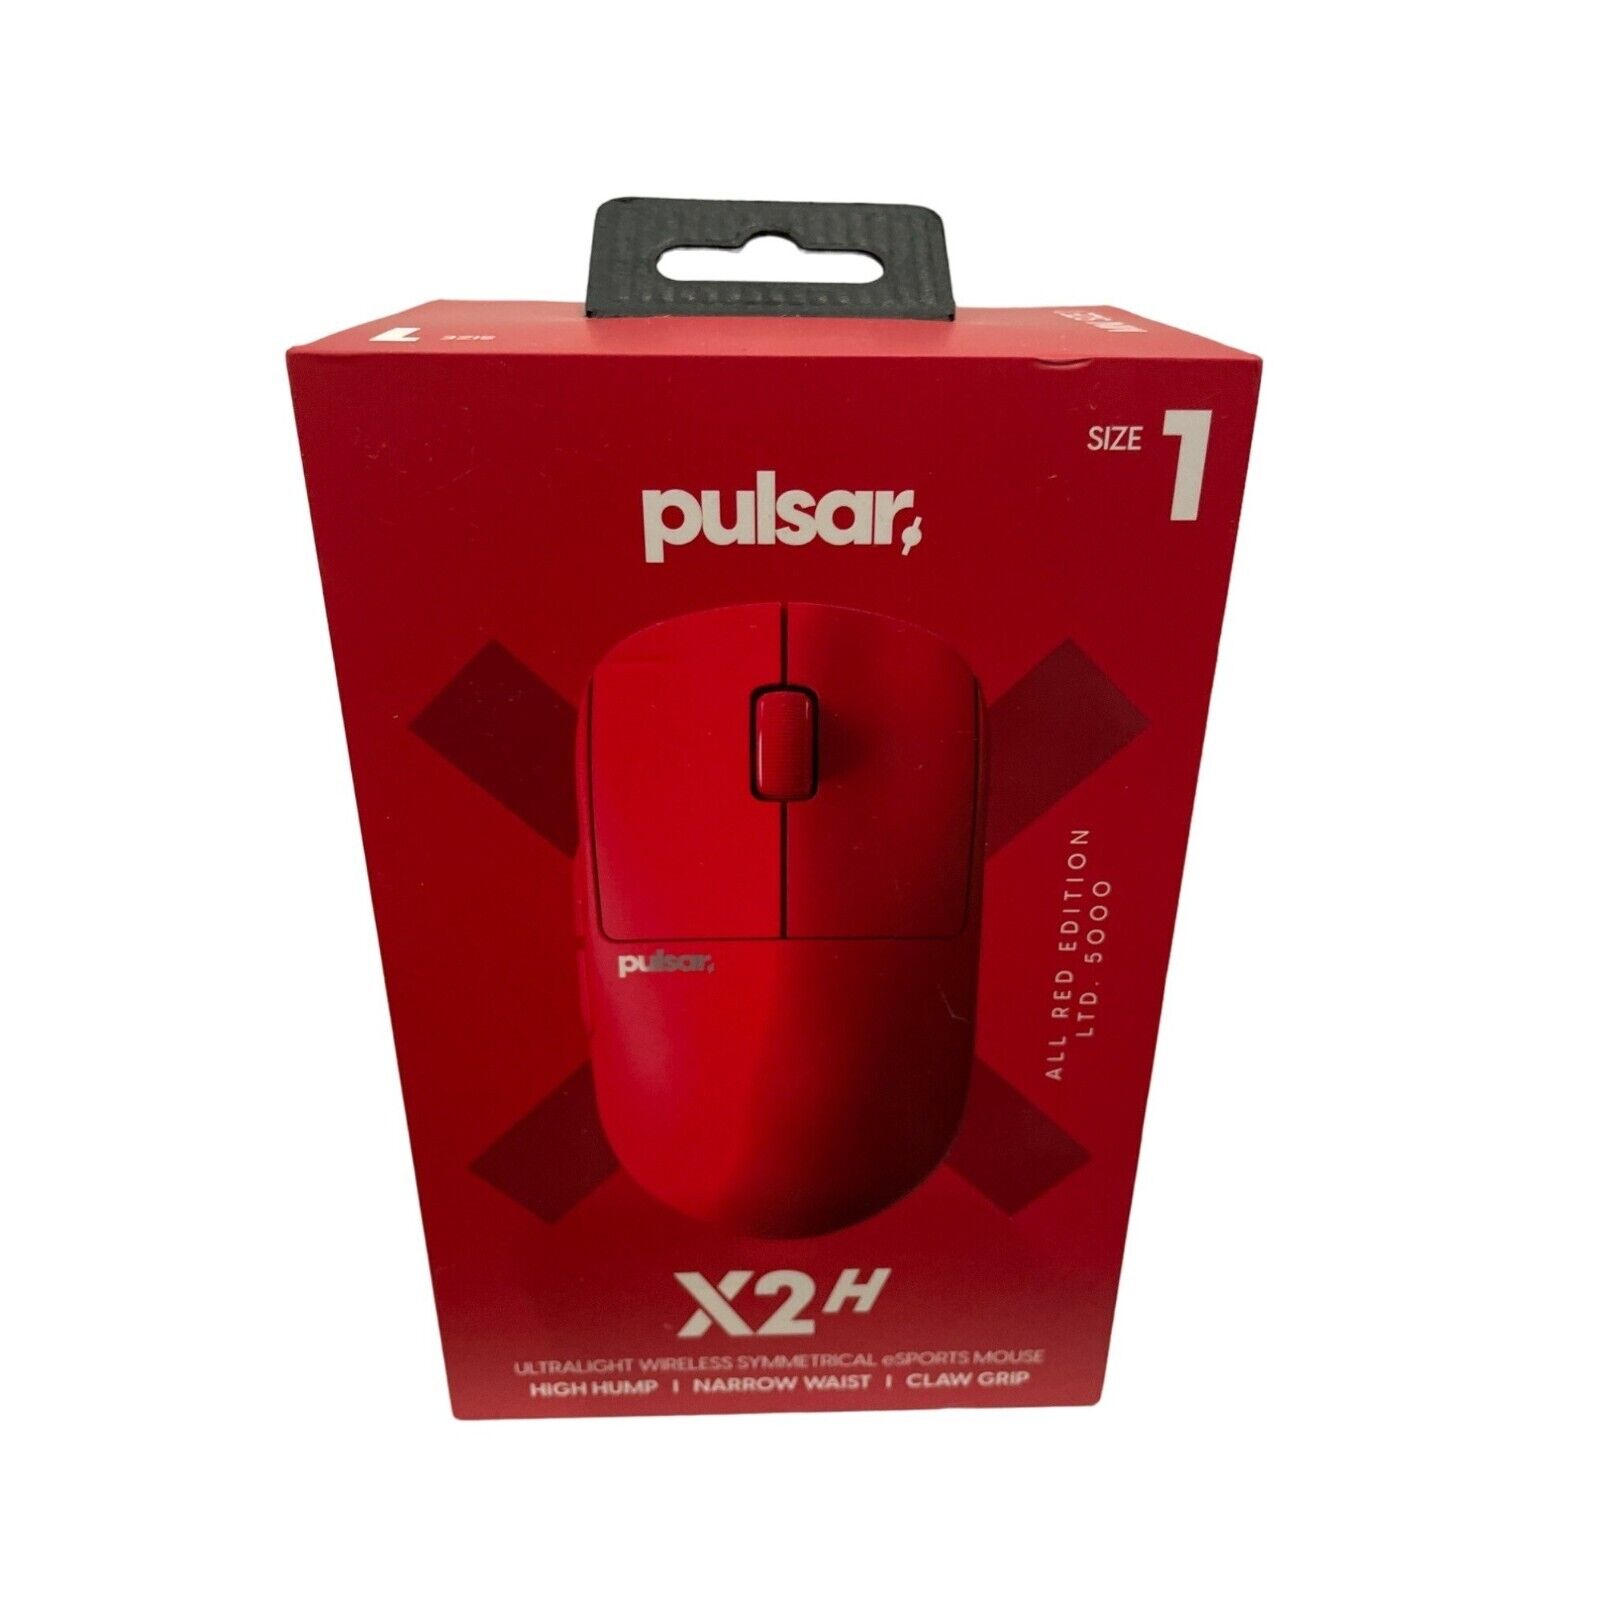 Pulsar Gaming Gears X2H Mini Size 1 - ALL RED Limited Edition Wireless Mouse 4K